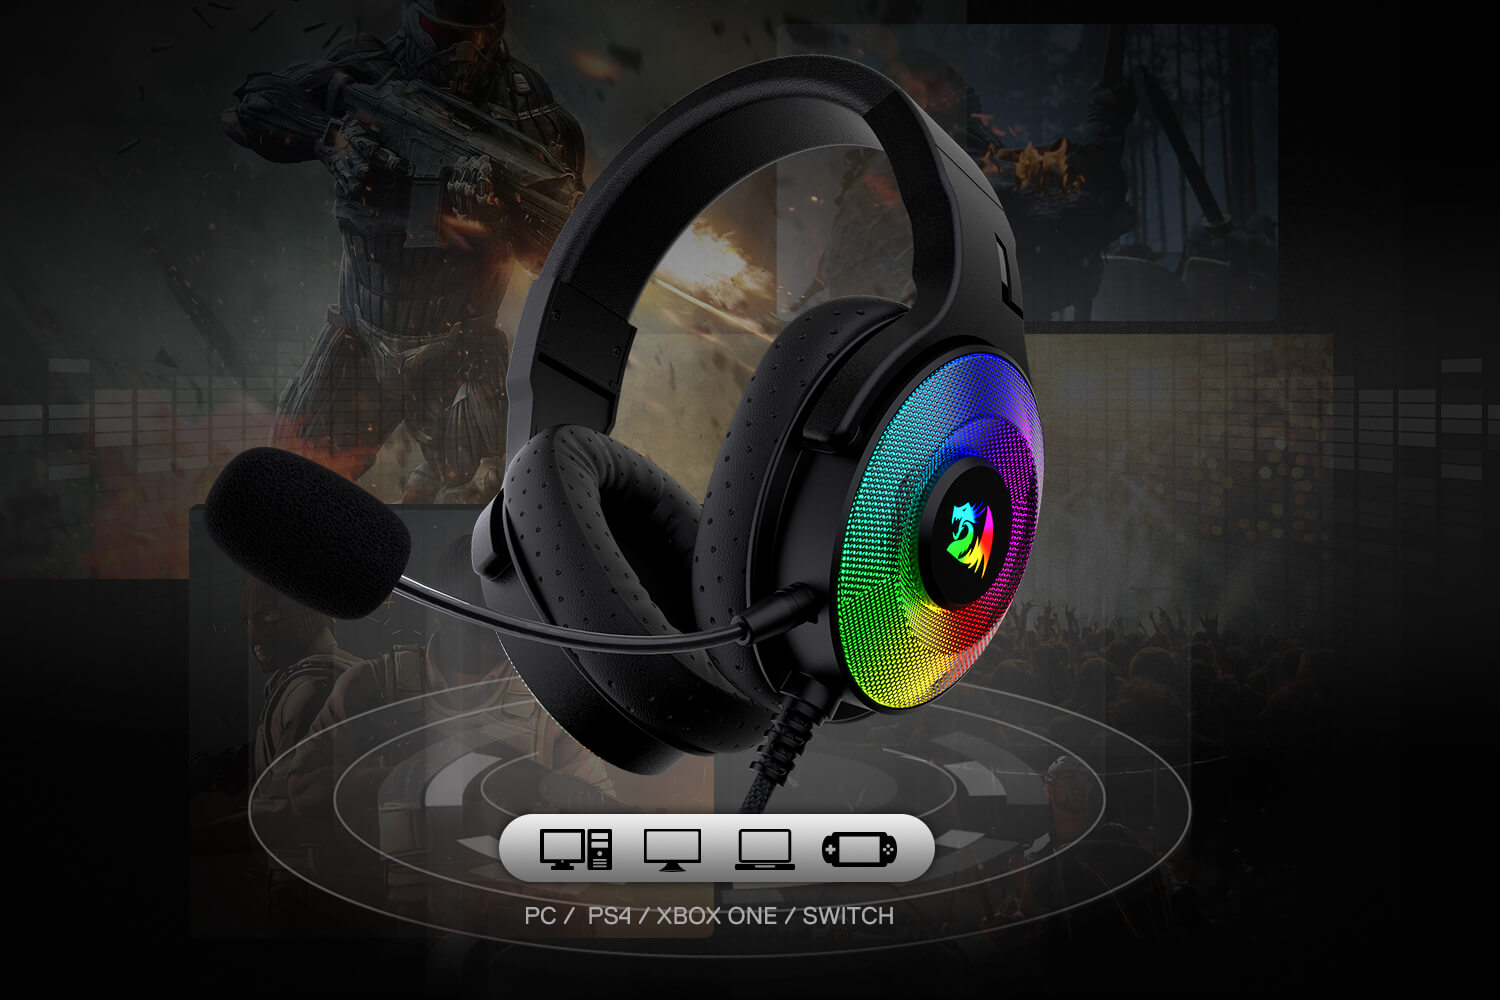 Over-Ear Headphones Works for PC/PS4/XBOX One/NS